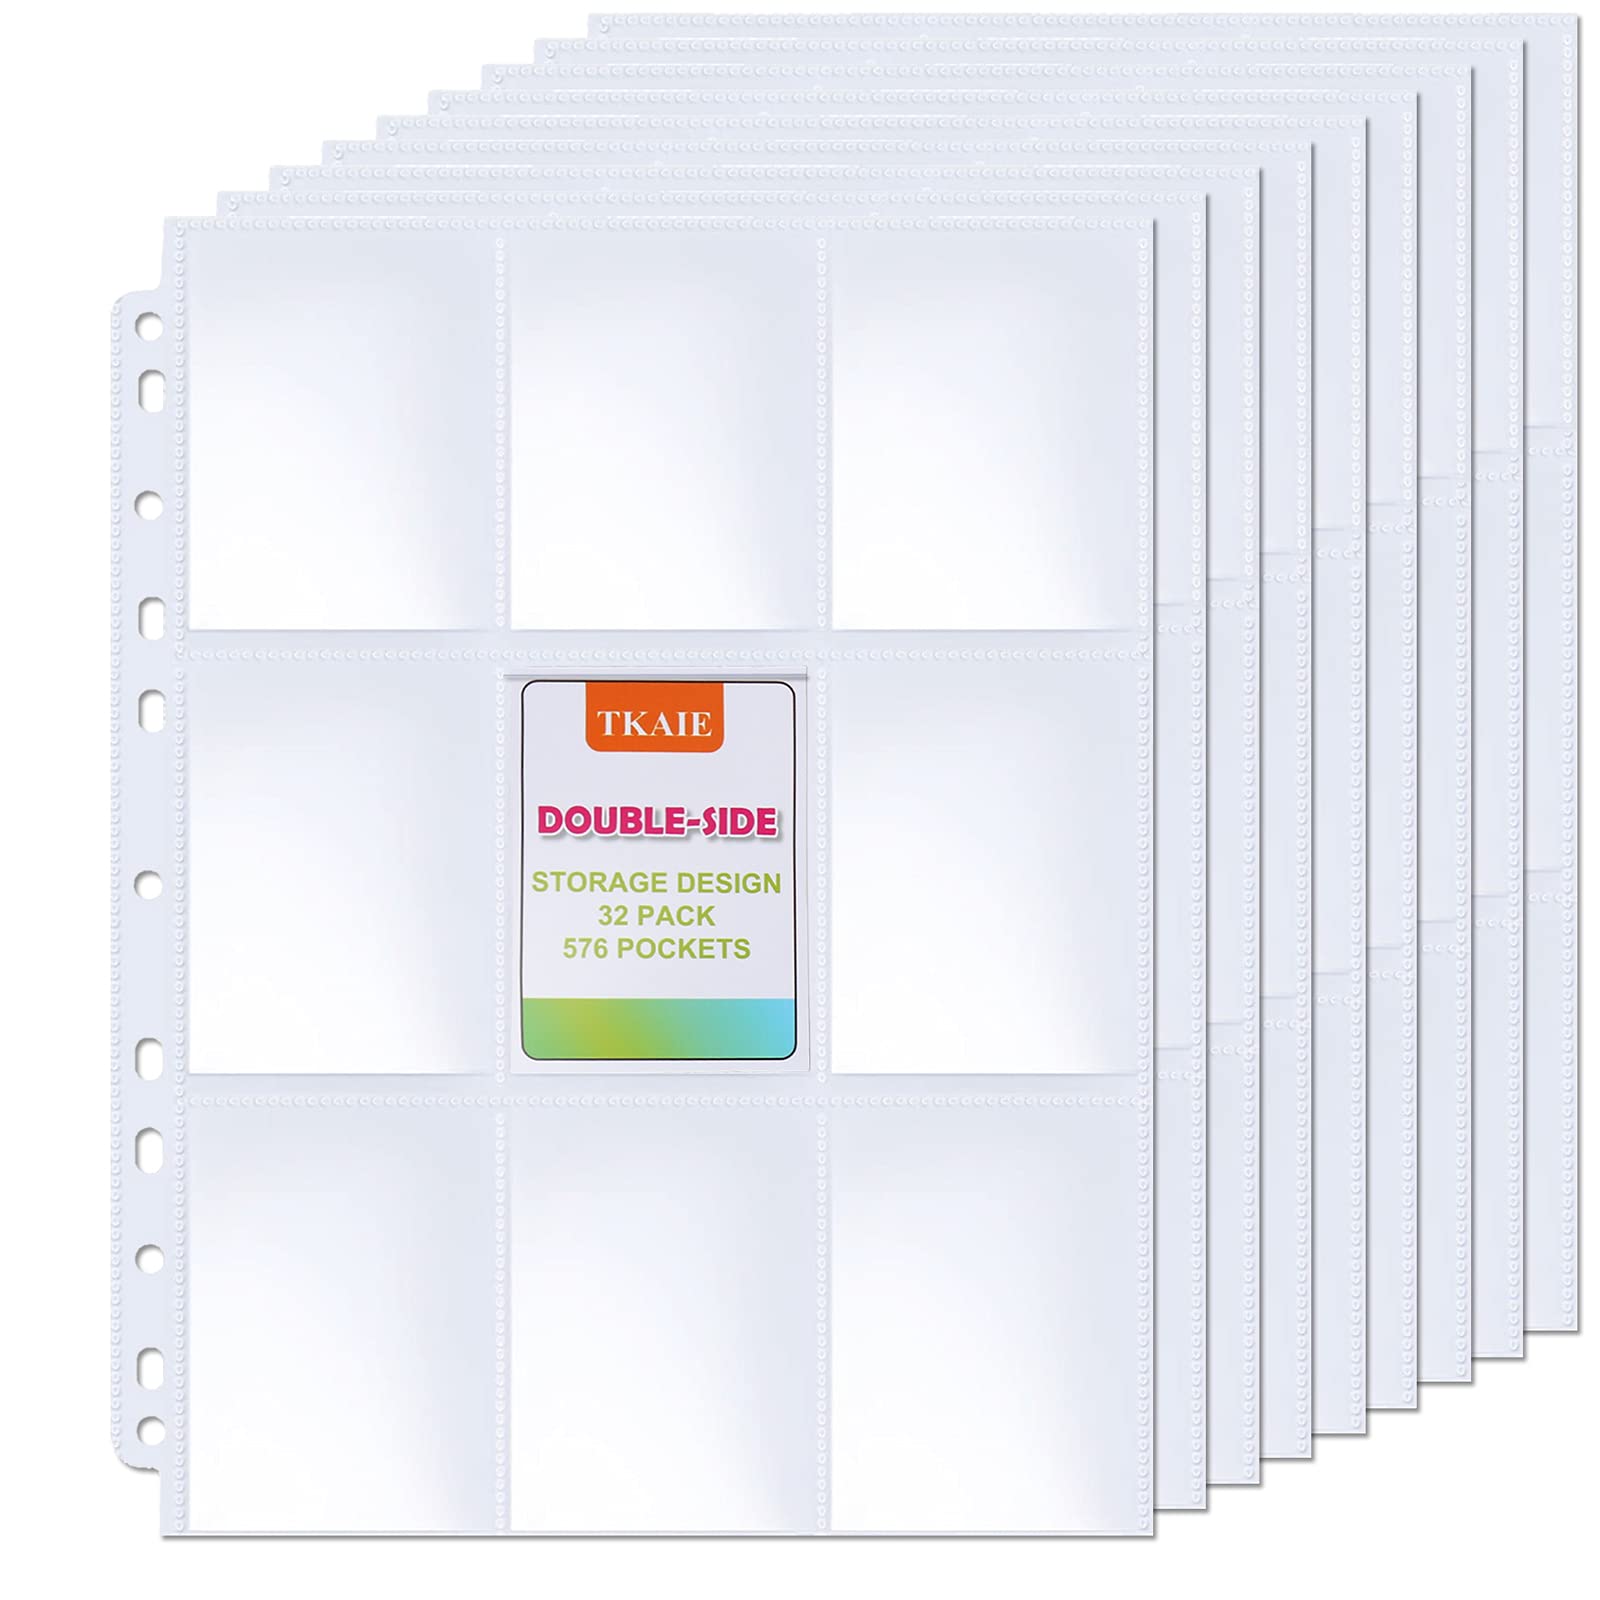 Business Card Sleeves for 3 Ring Binders, Plastic Card Holder Sheets, 10 Pack - 20 Cards per Sheet